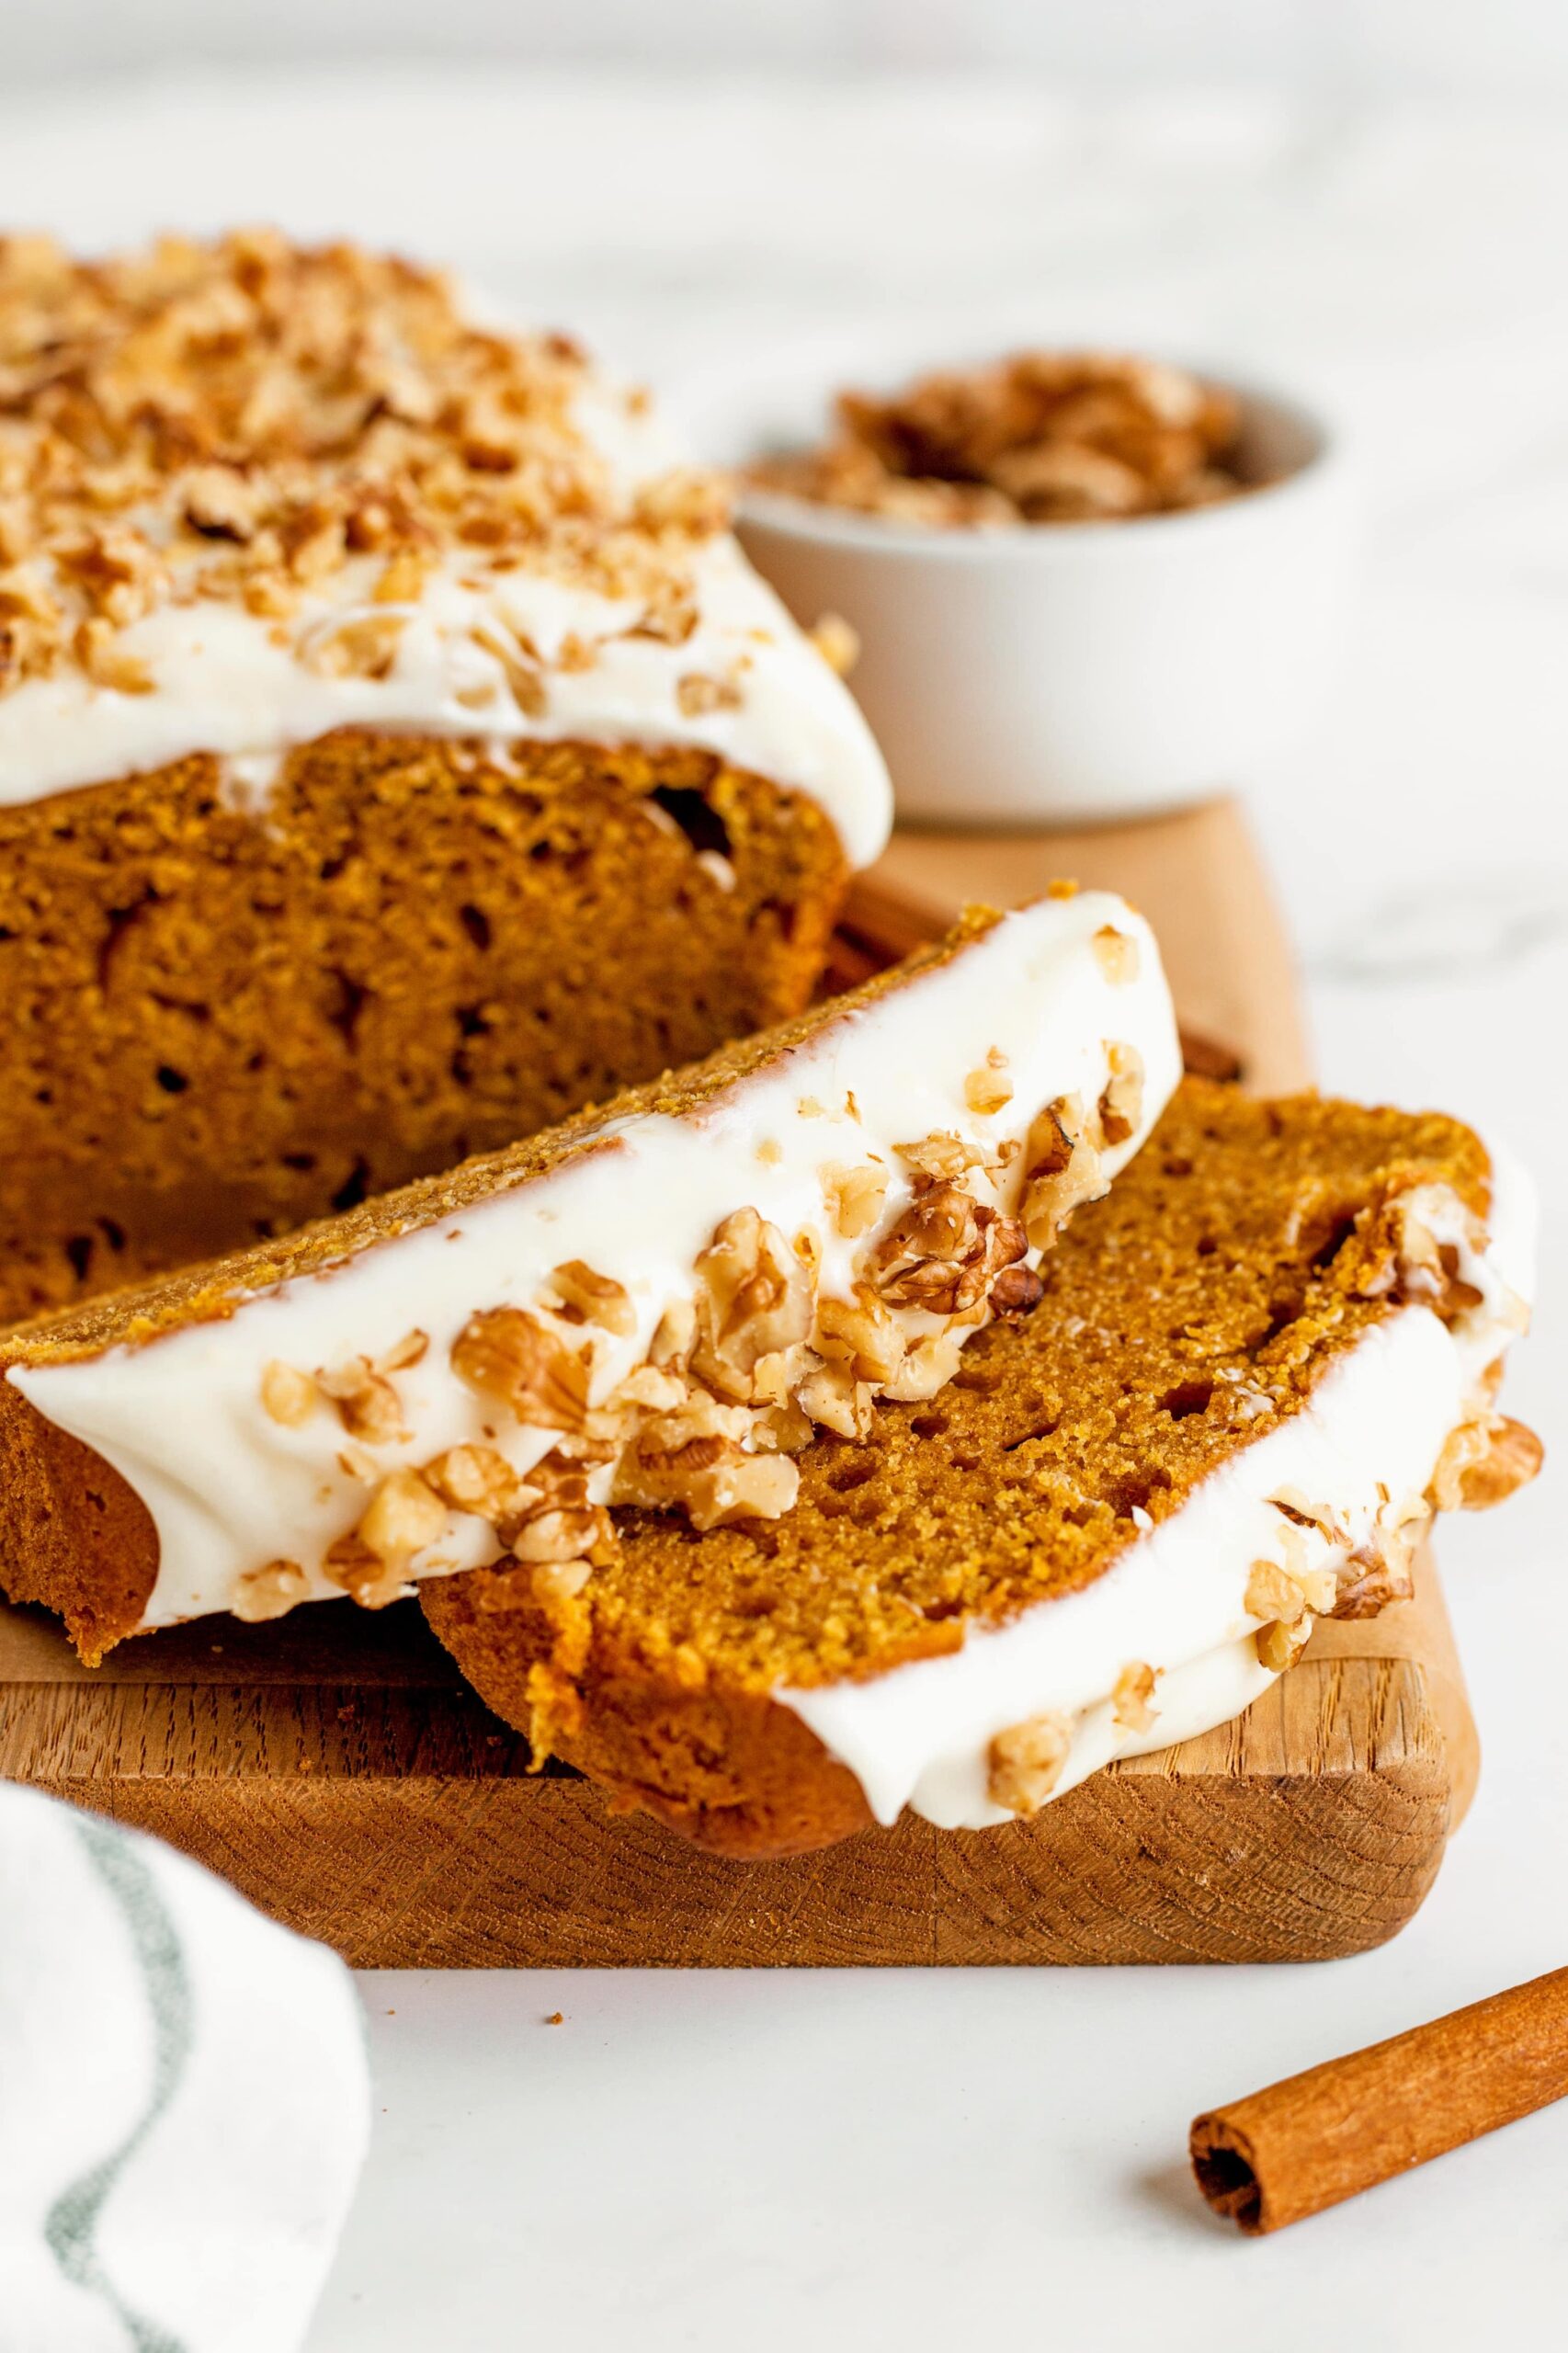  Wake up to a slice of pumpkin bliss!